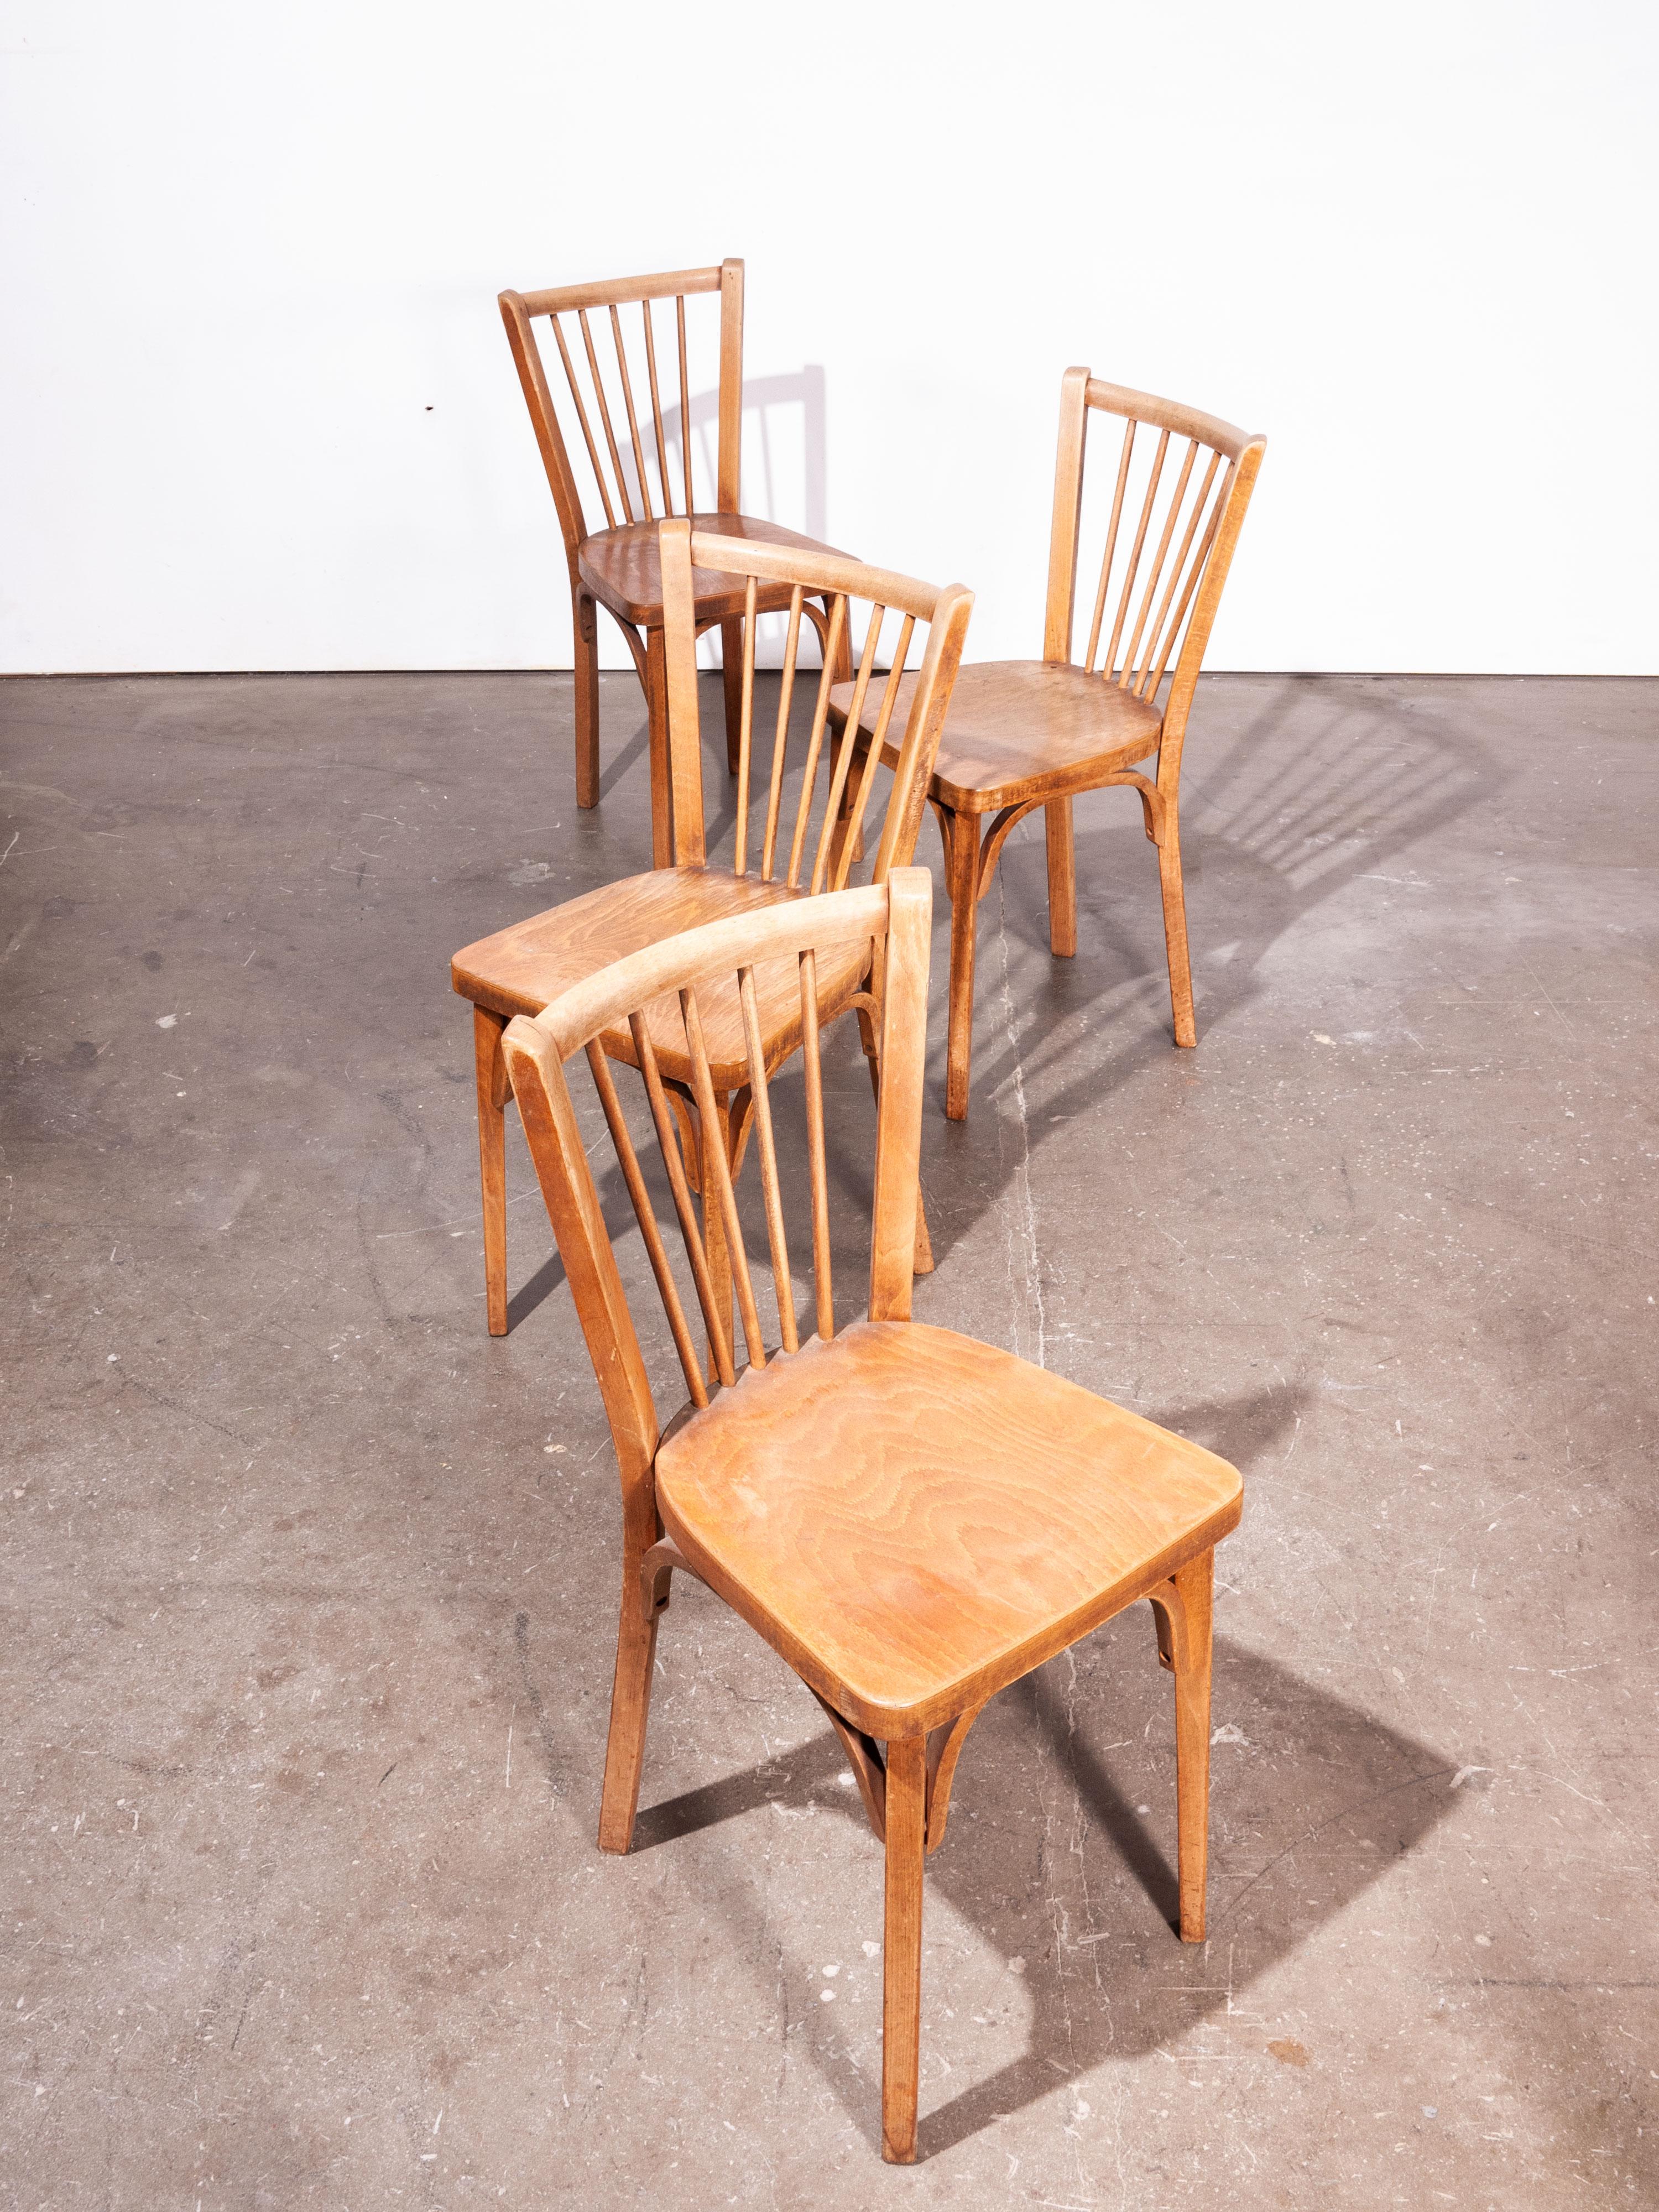 1950s Baumann bistro dining chairs, set of four

1950s vintage Baumann bistro dining chairs, set of four. Classic Beech bistro chairs made in France by the maker Joamin Baumann. Stunning original patina and the chairs are stamped by the maker. We